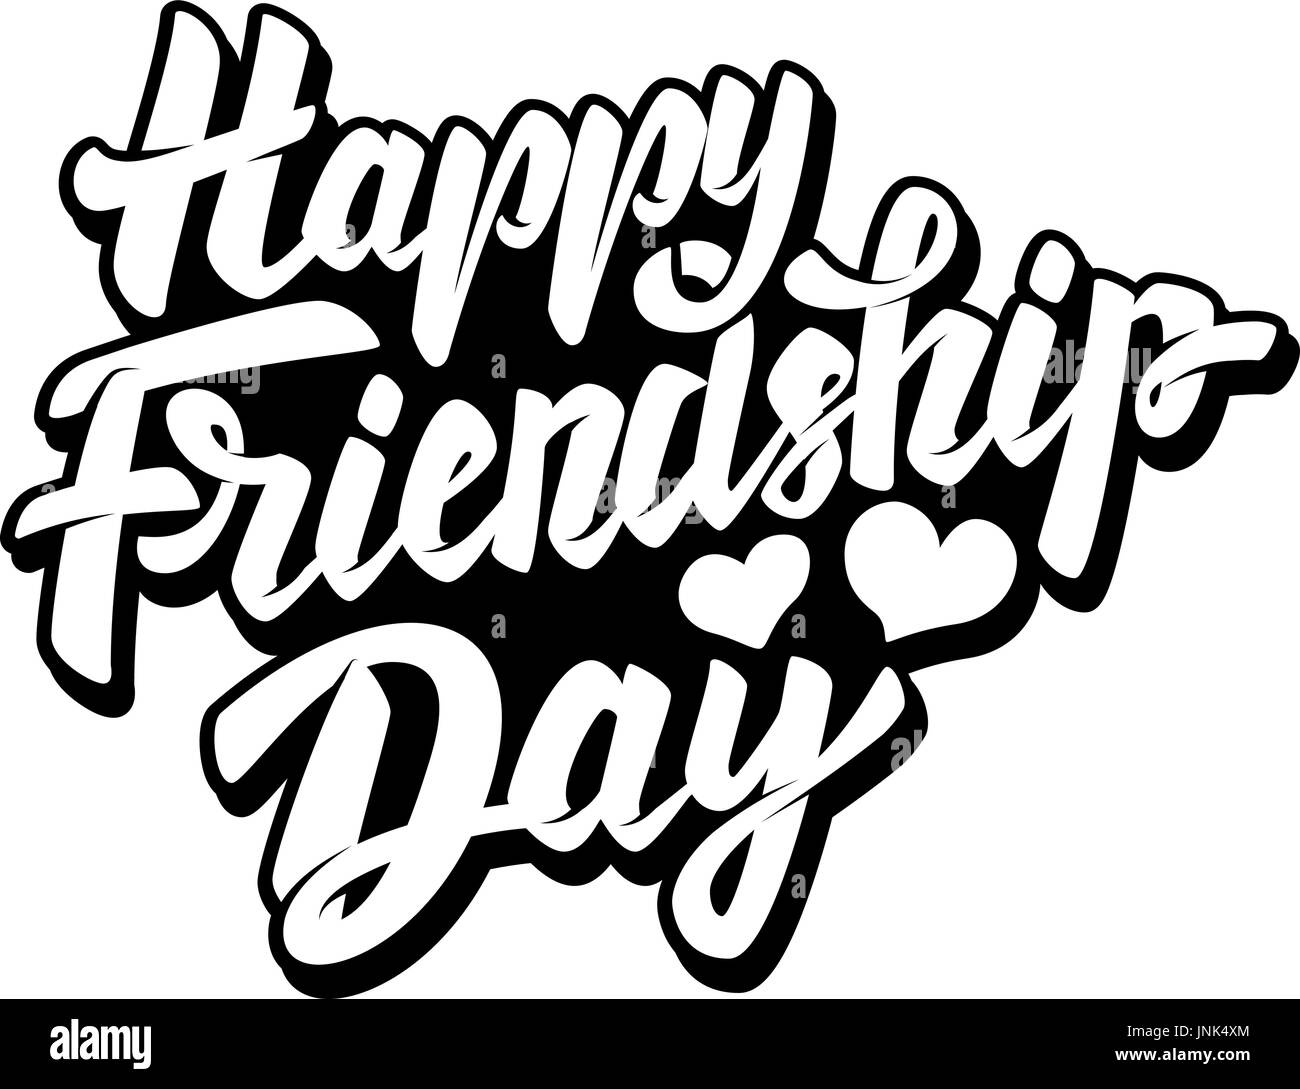 Happy Friendship Day Lettering Phrase With Star Shapes Vector